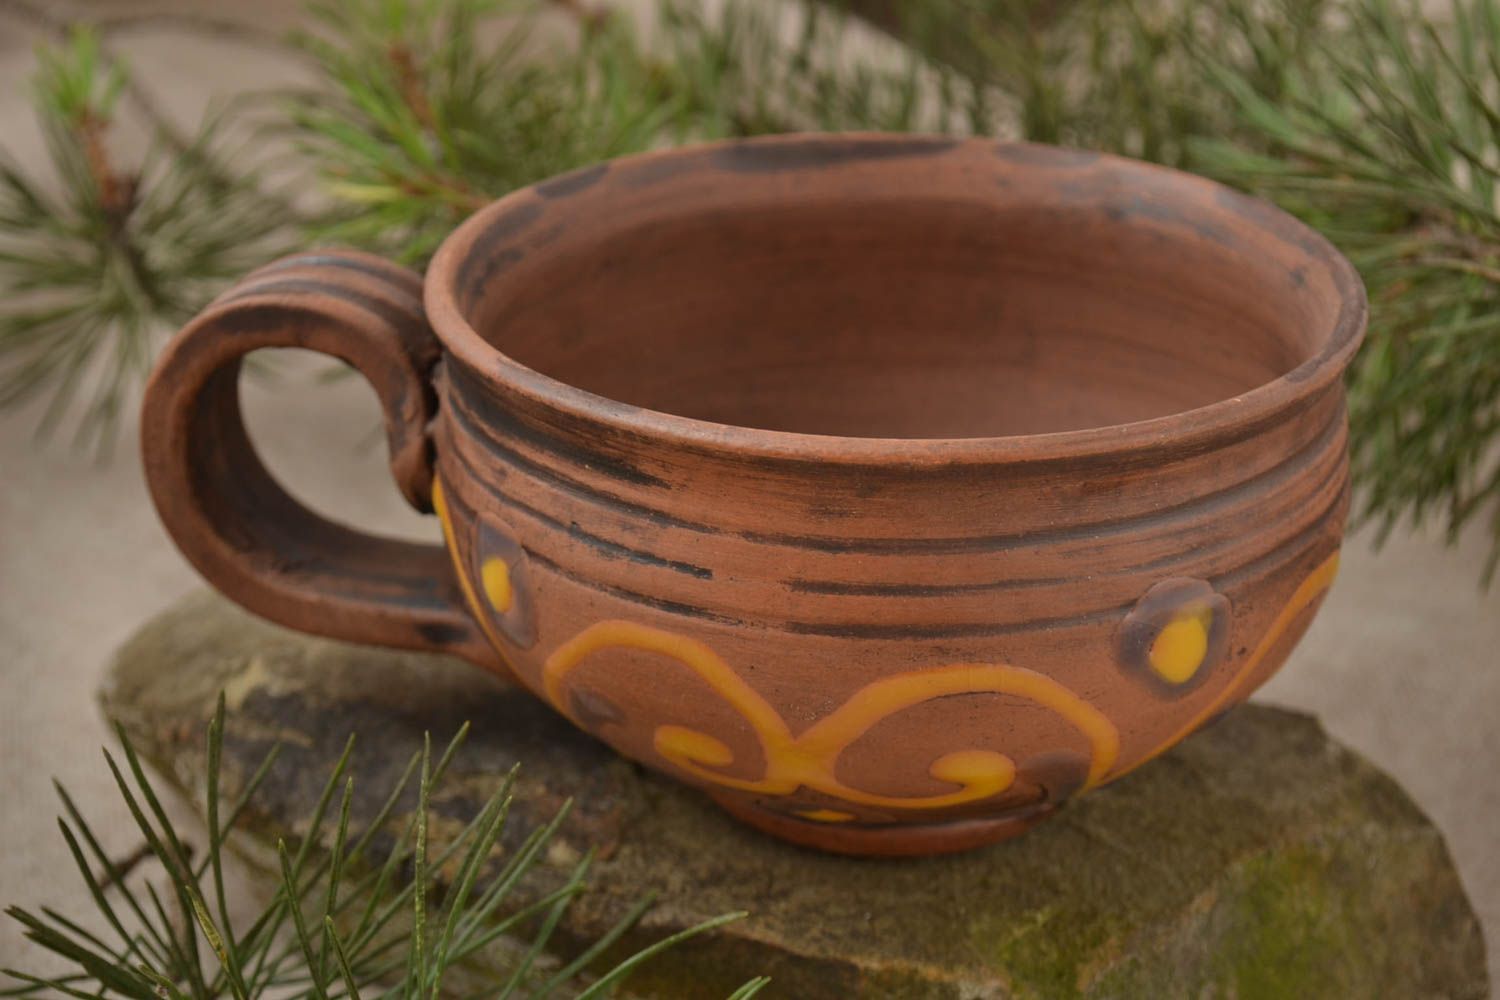 Clay teacup with handle in brown color with yellow pattern 0,36 lb photo 1